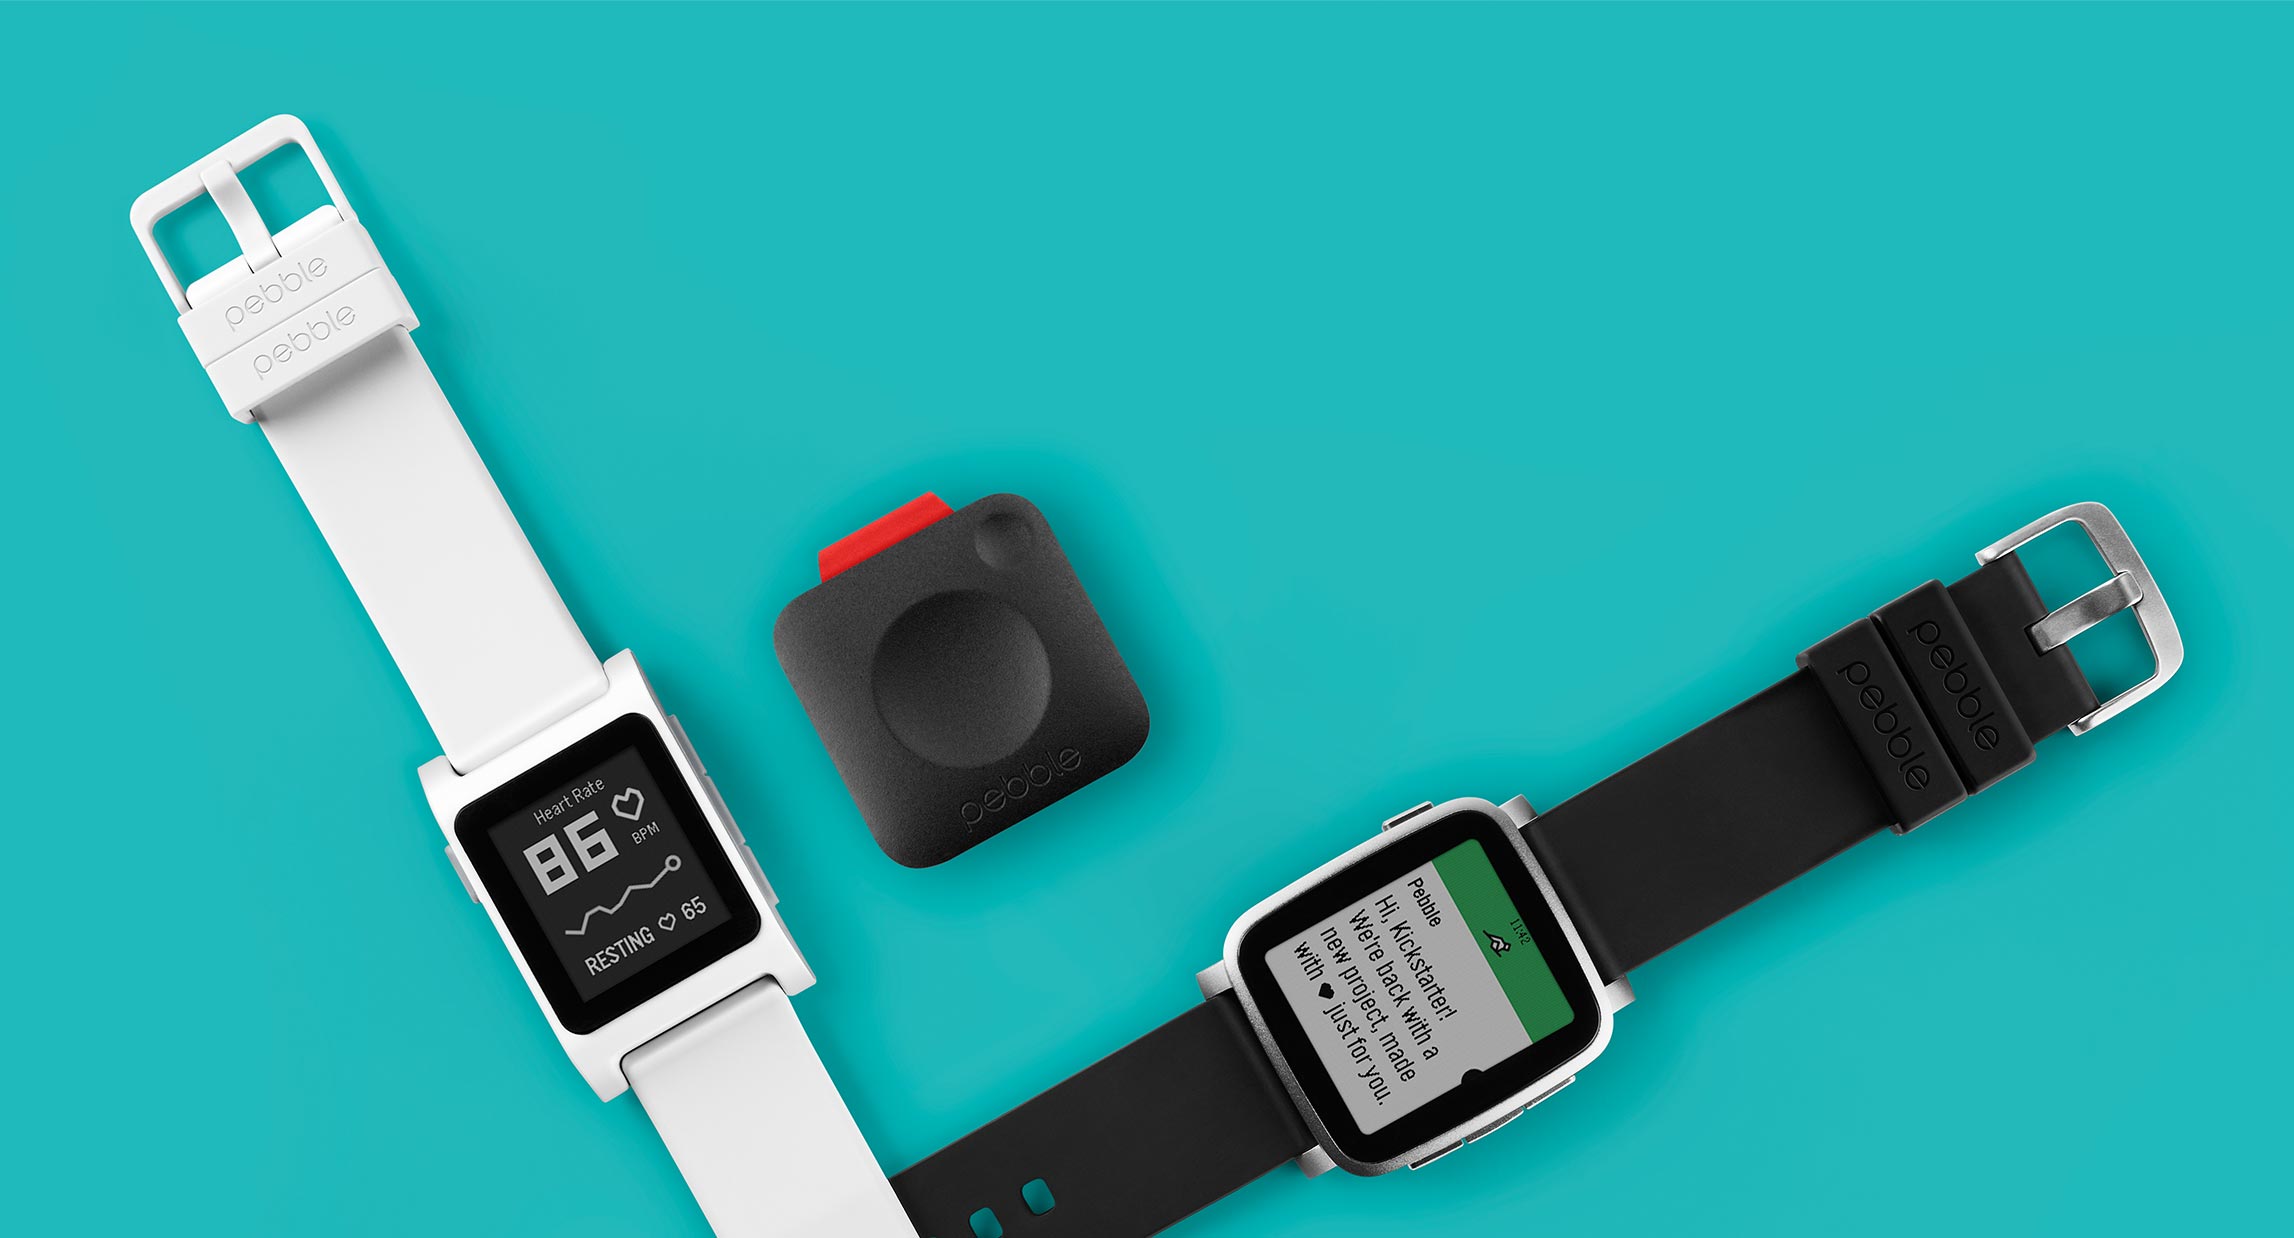 Pebble 2 is Pebble's Sporty Smartwatch with A Built-in Heart Rate Sensor